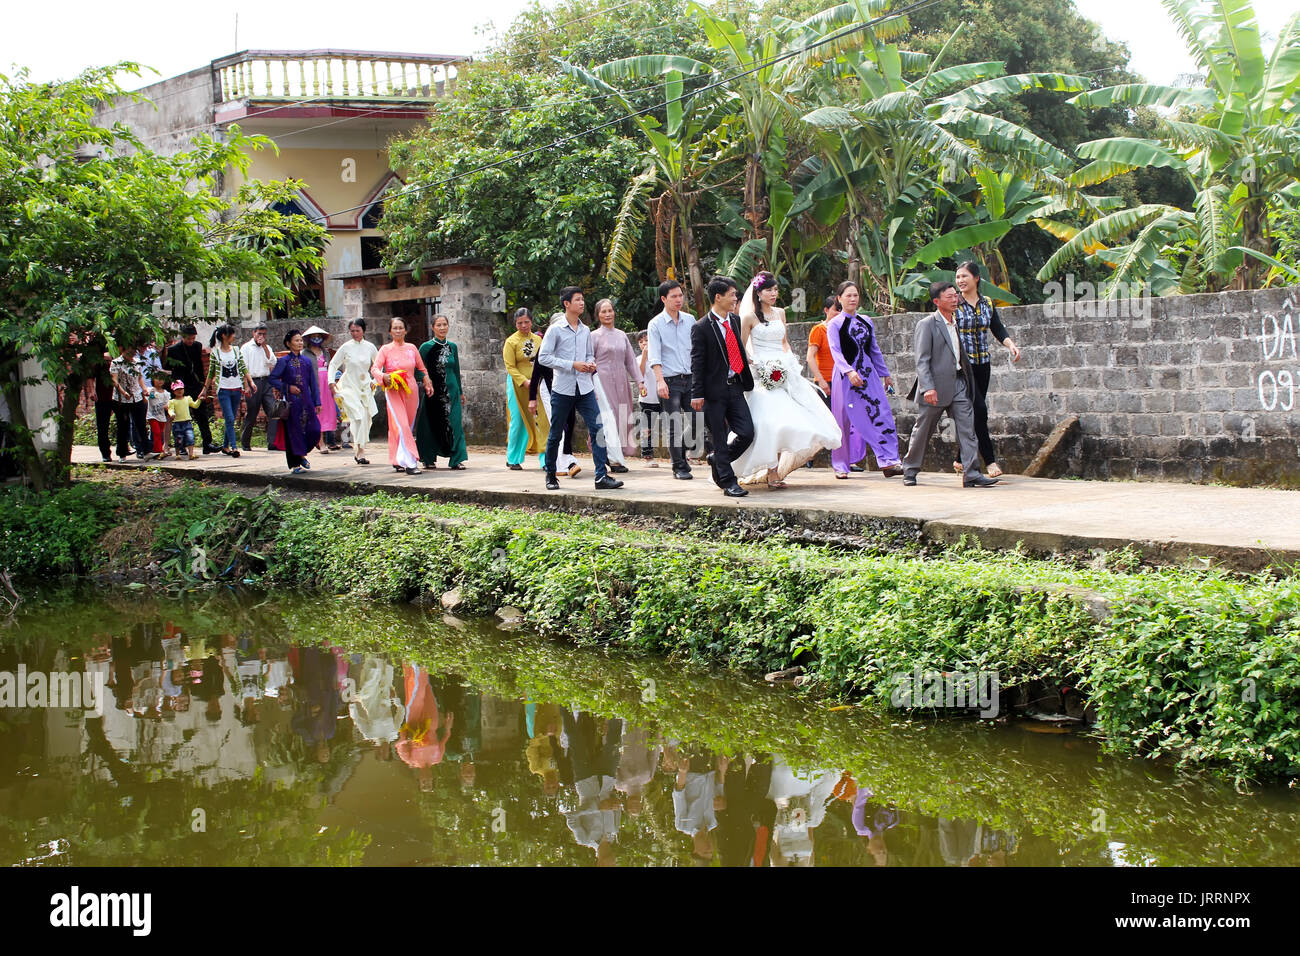 HAI DUONG, VIETNAM, July, 16: people attending the wedding tradition in rural Vietnam on July, 16,2013 in Hai Duong, Vietnam. Stock Photo